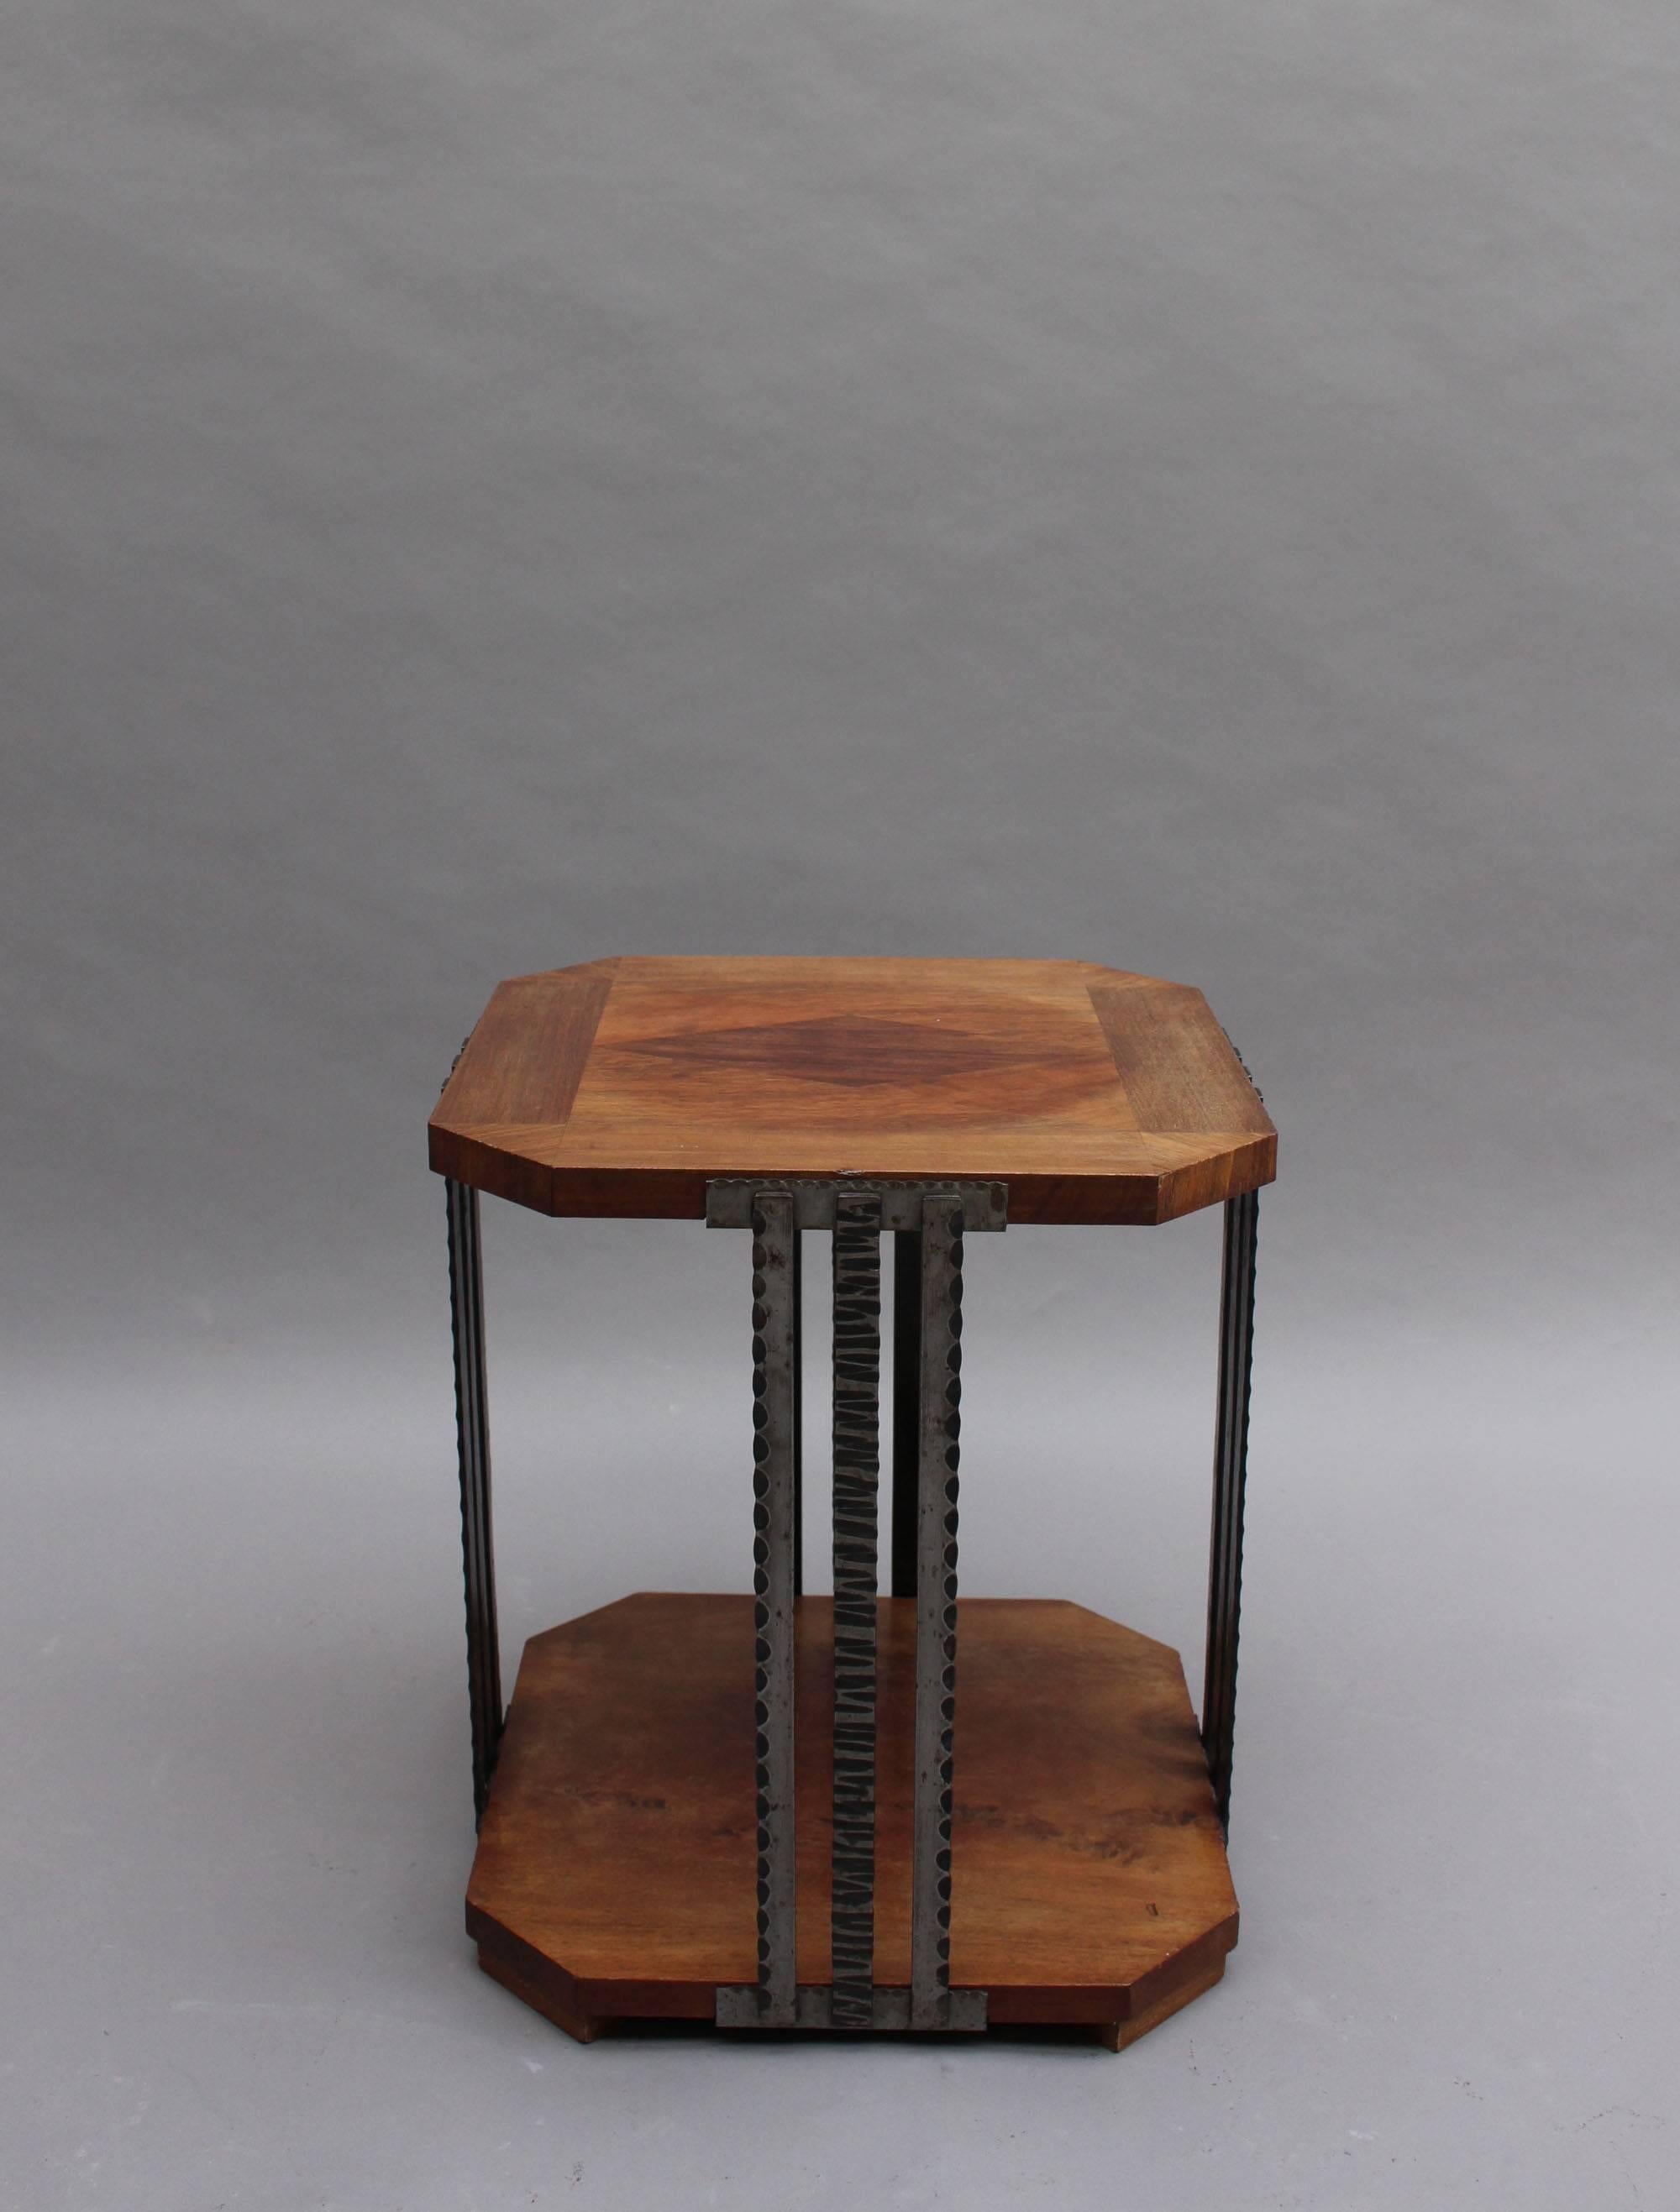 A fine French Art Deco two-tiered gueridon or side table with four triple wrought iron stems legs that support a walnut marquetry top.